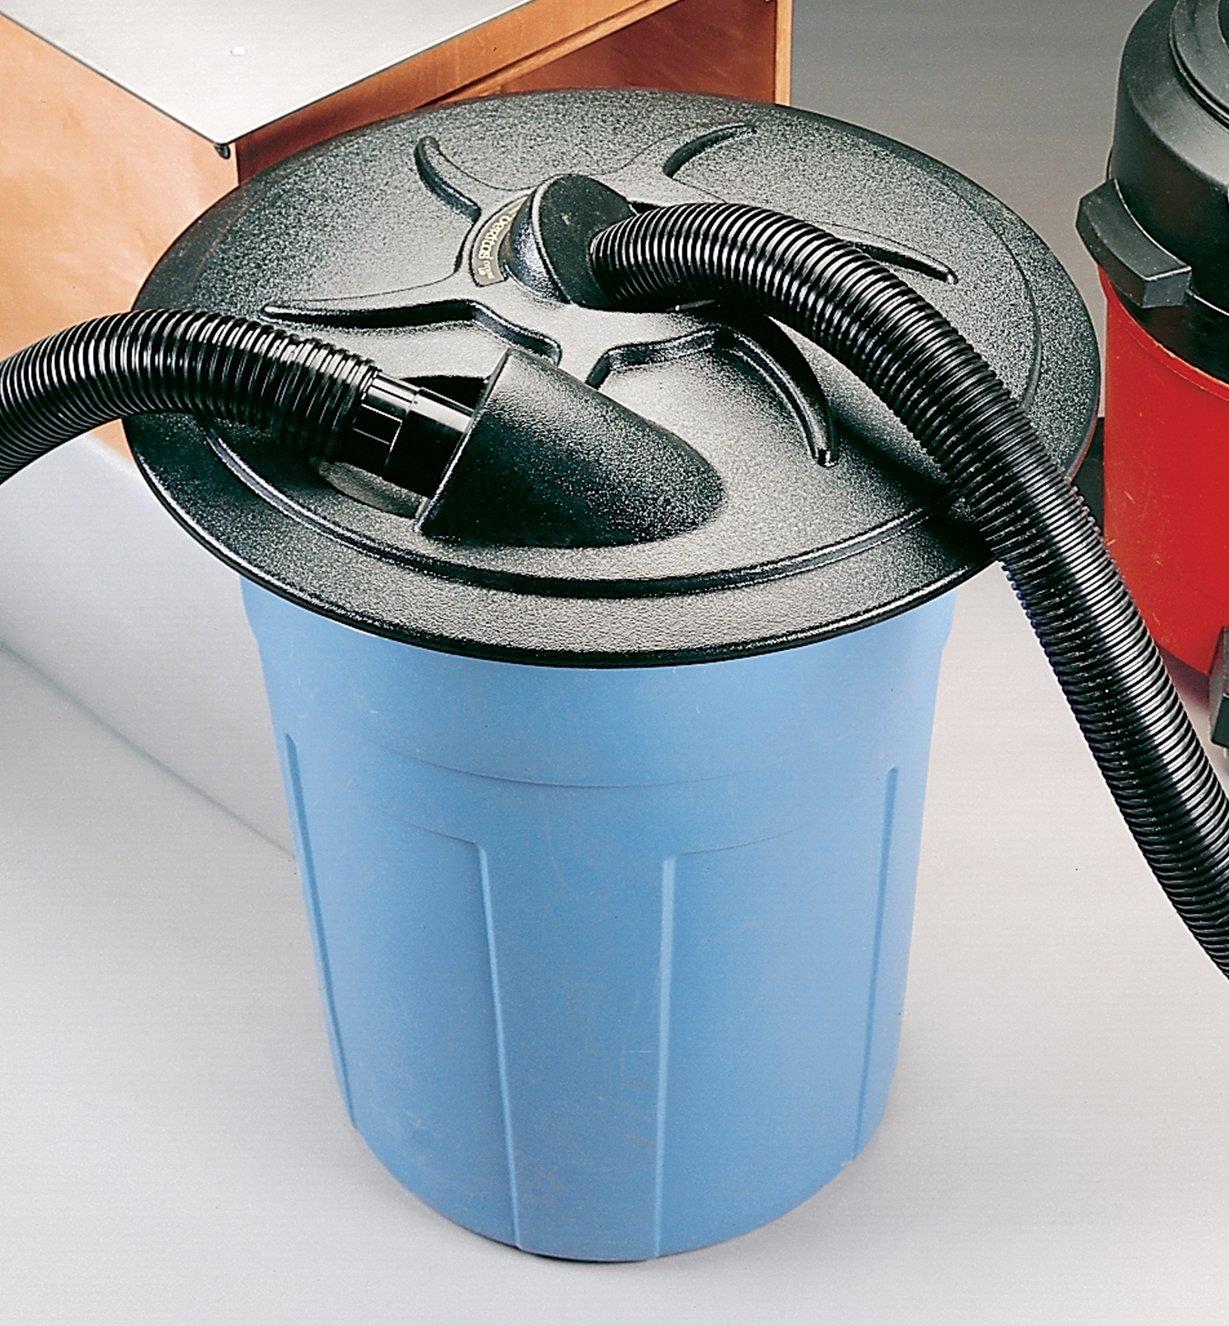 Veritas Cyclone Lid with hoses connected installed on a trashcan